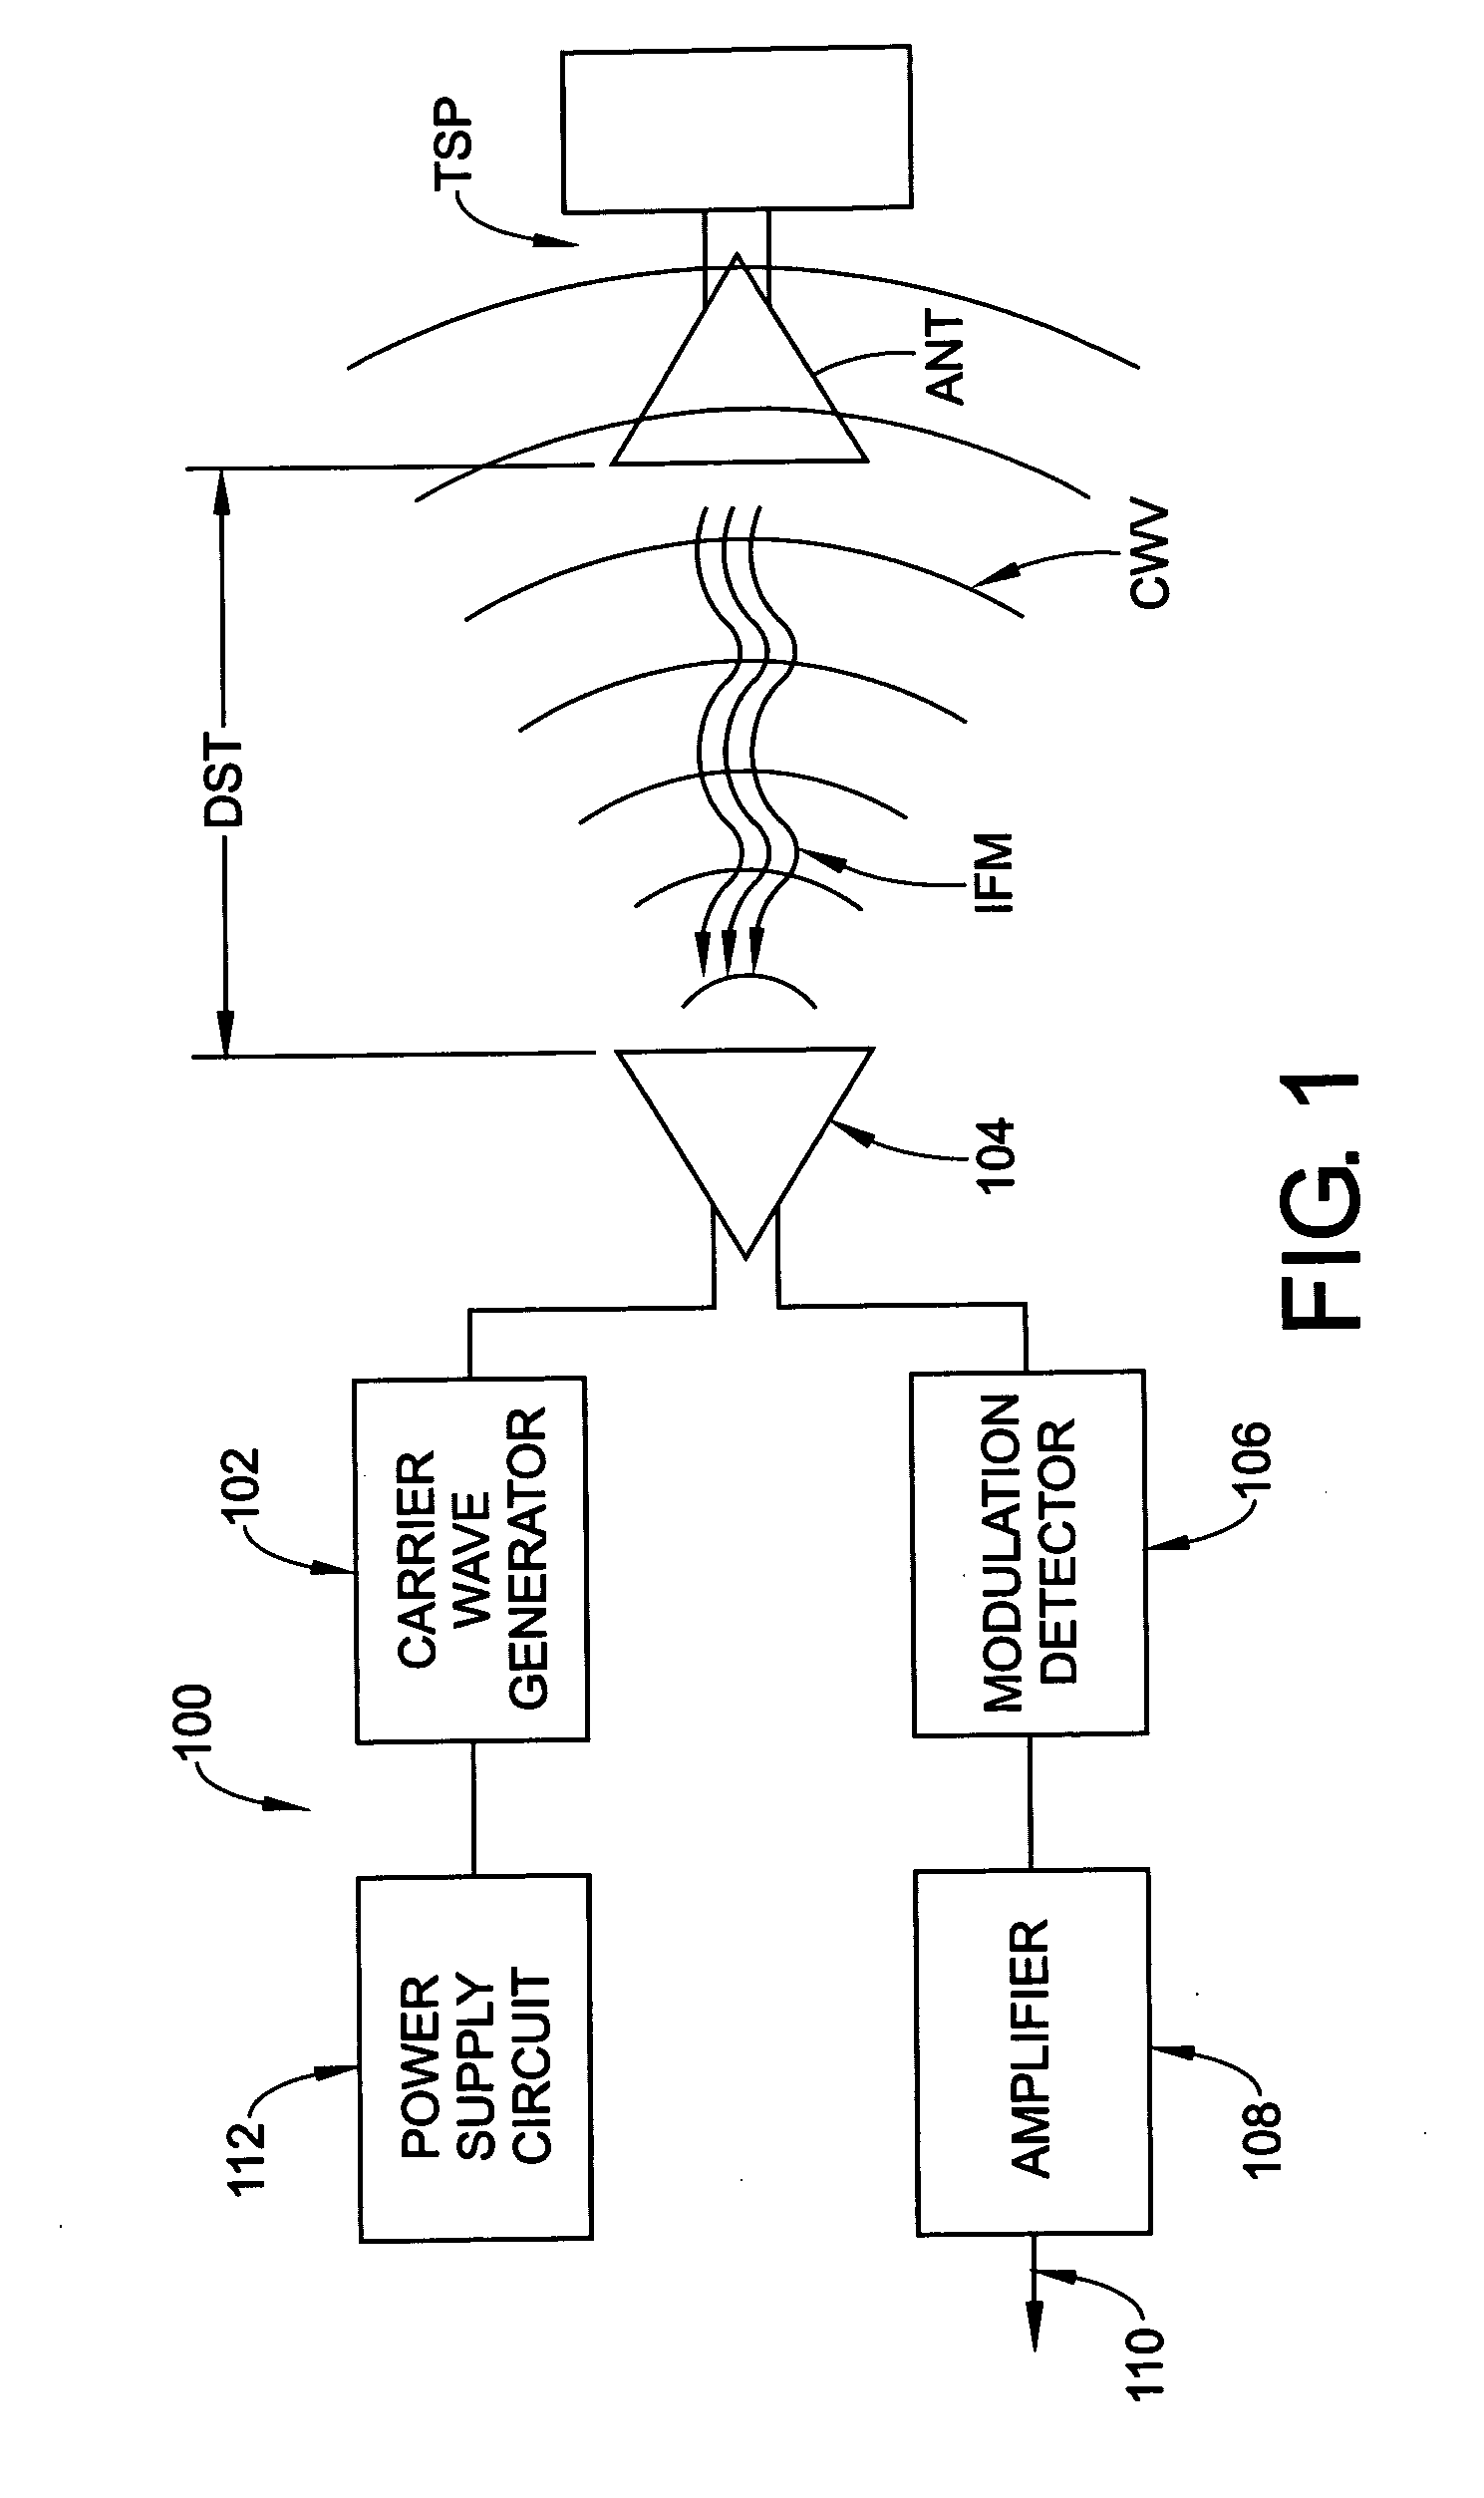 Sensing and communication system and method